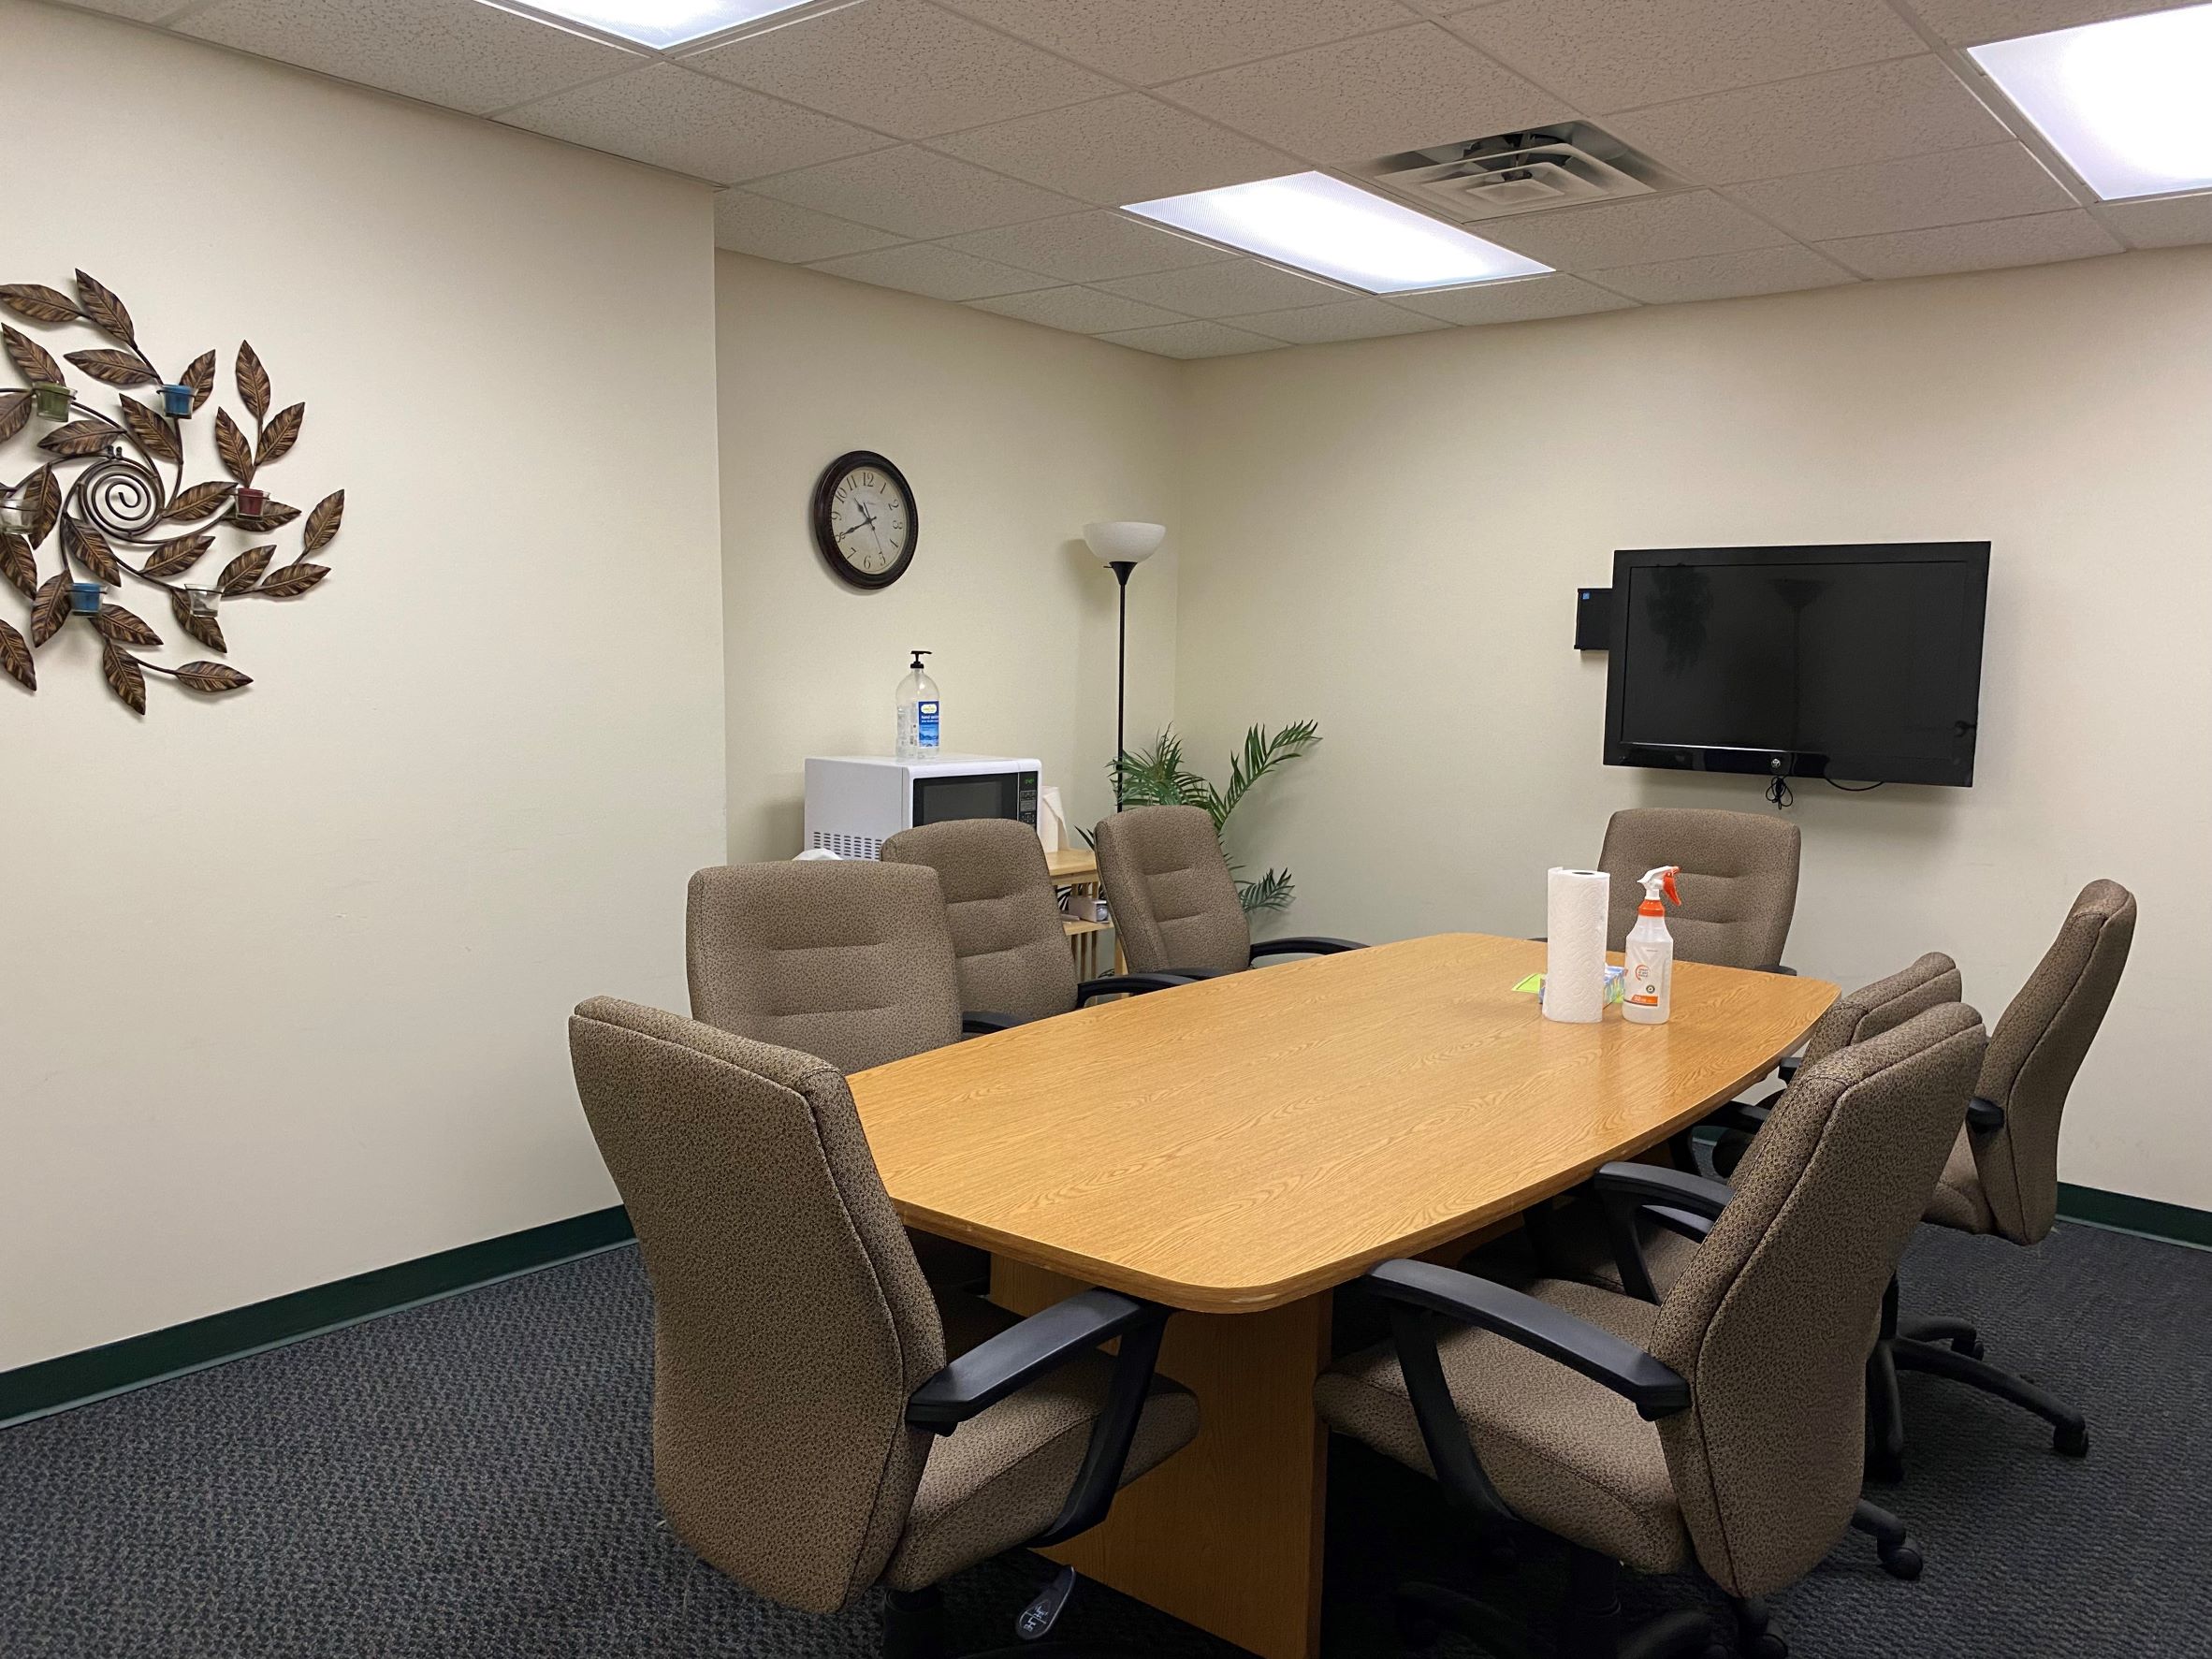 Small conference room with table and chairs